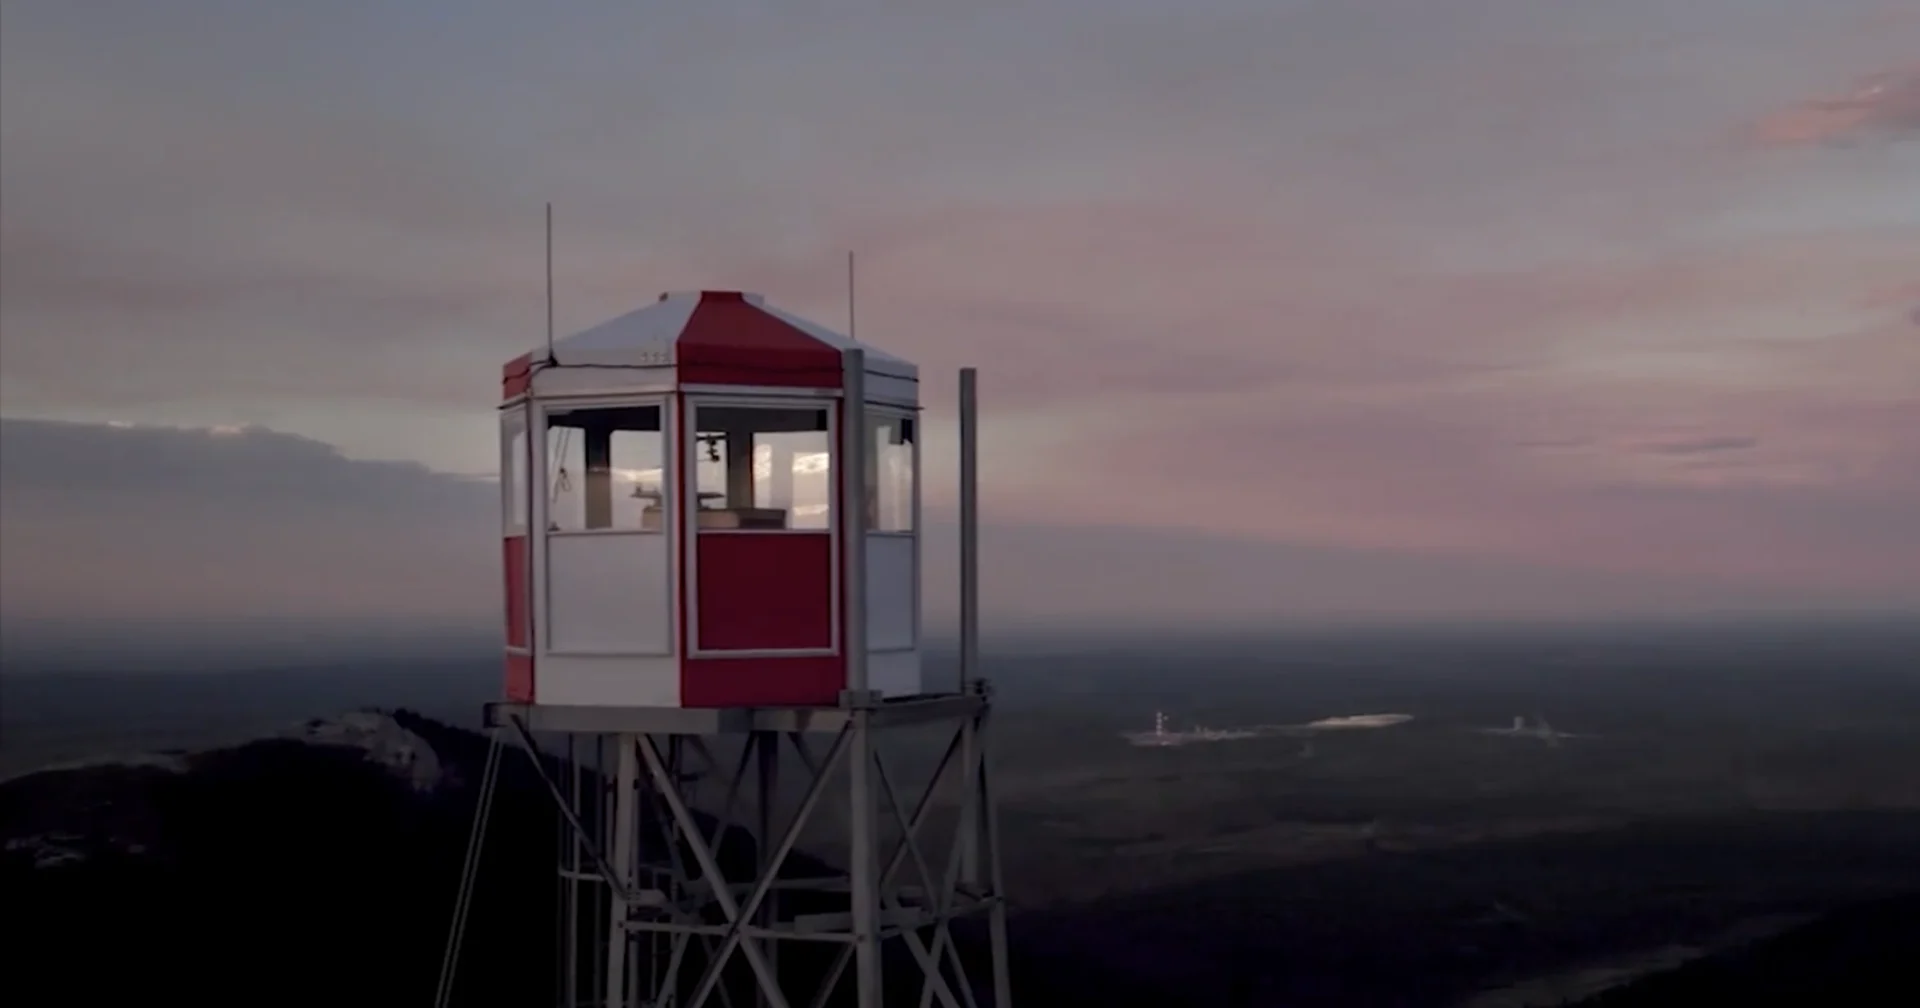 If you’ve ever wondered what it’s like to work inside a fire tower, you’re in luck. We have a firsthand look at the job, here